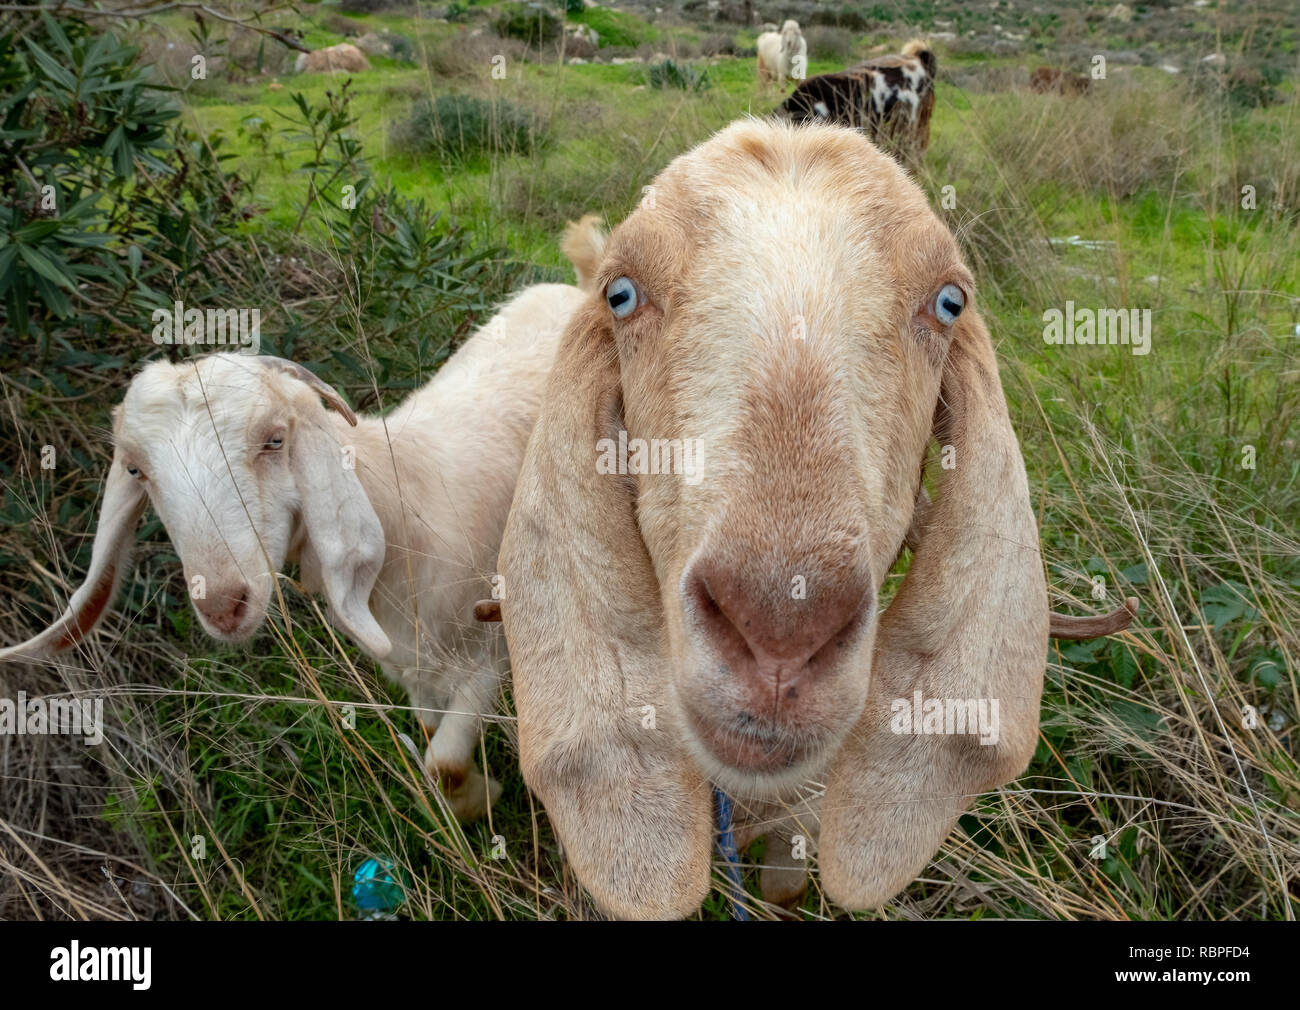 Inquisitive goats look at the camera in Paphos, Cyprus. Stock Photo